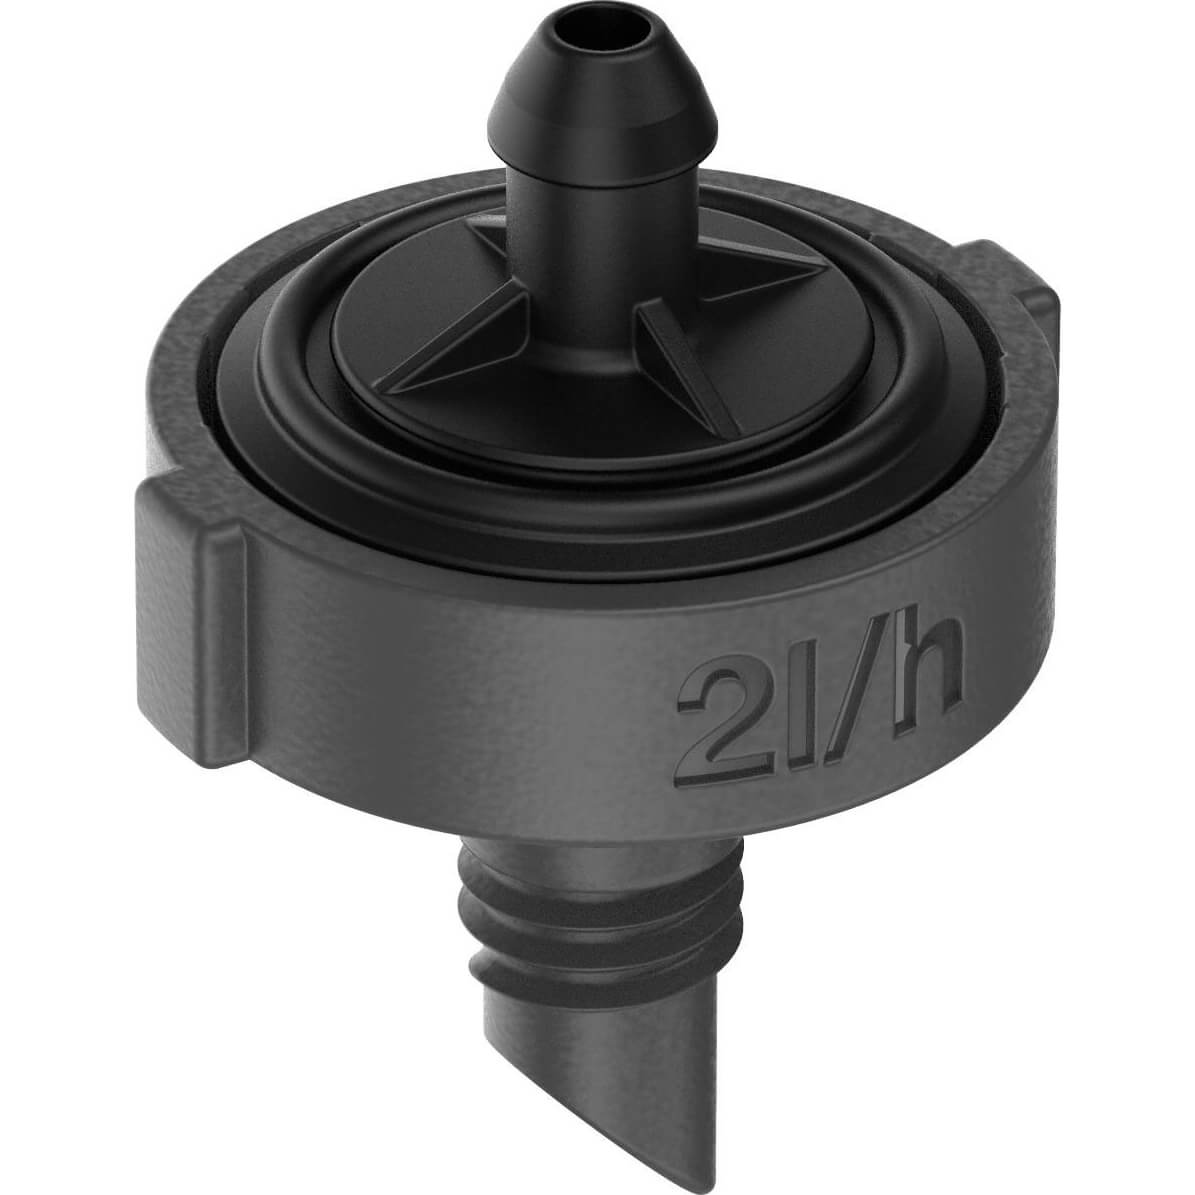 Image of Gardena MICRO DRIP Endline Pressure Compensating Drip Head (New) 3/16" / 4.6mm 2 Litres Hour Pack of 10